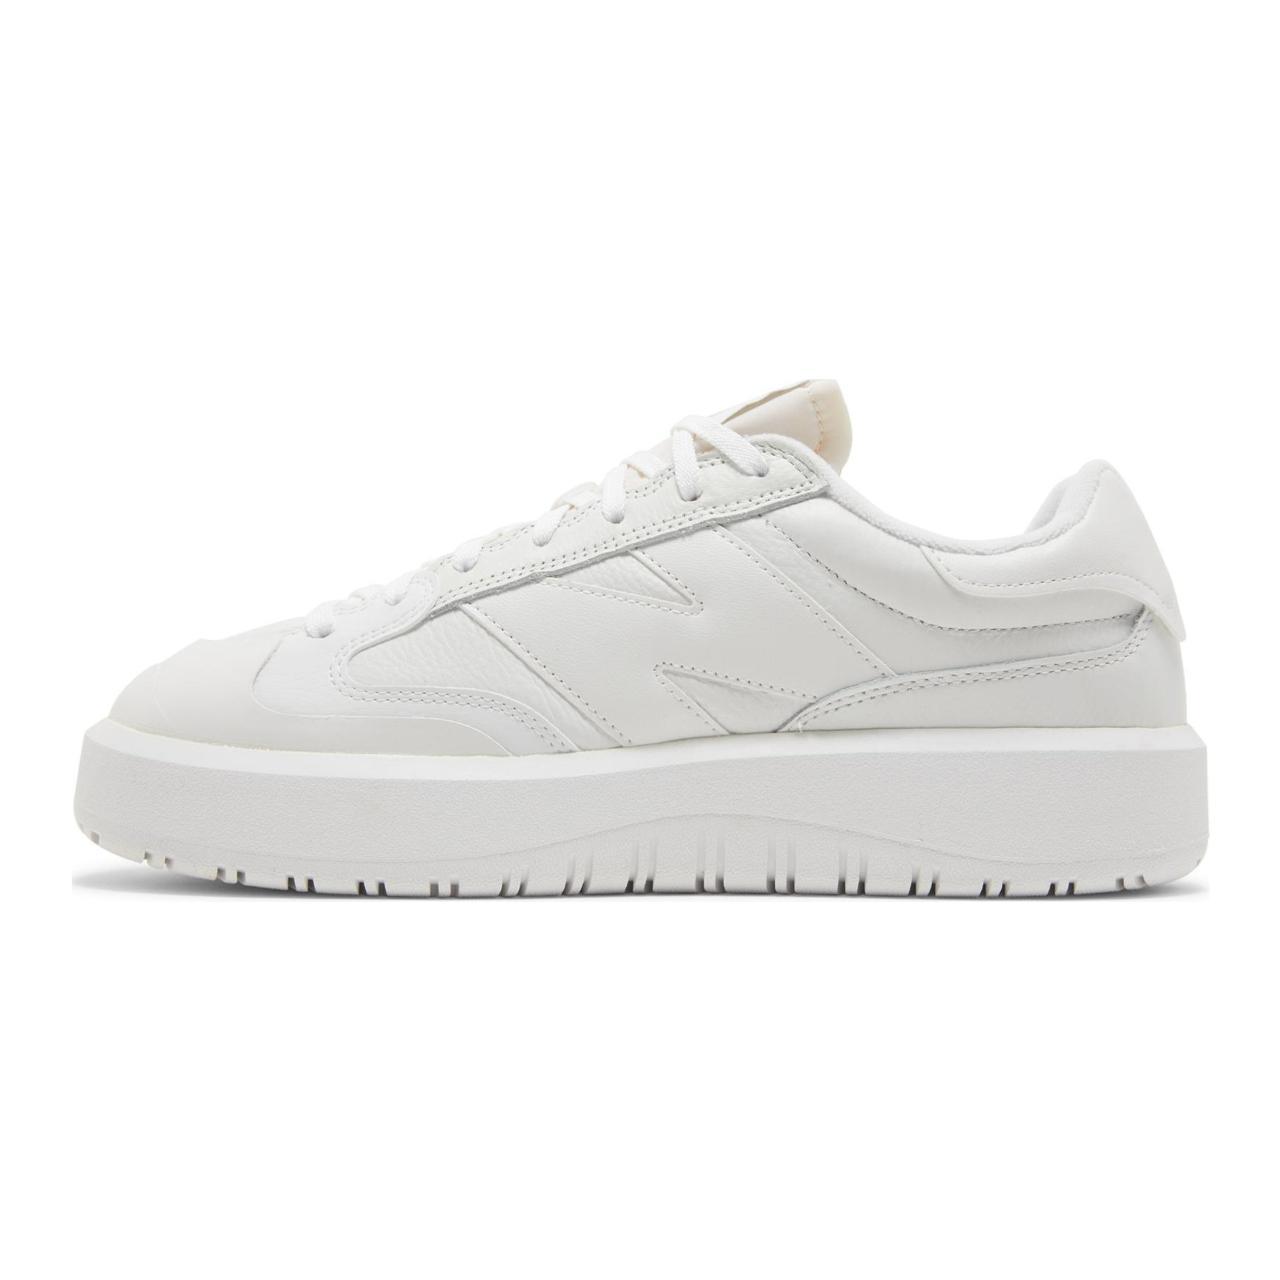 New Balance CT302 sneakers in triple white